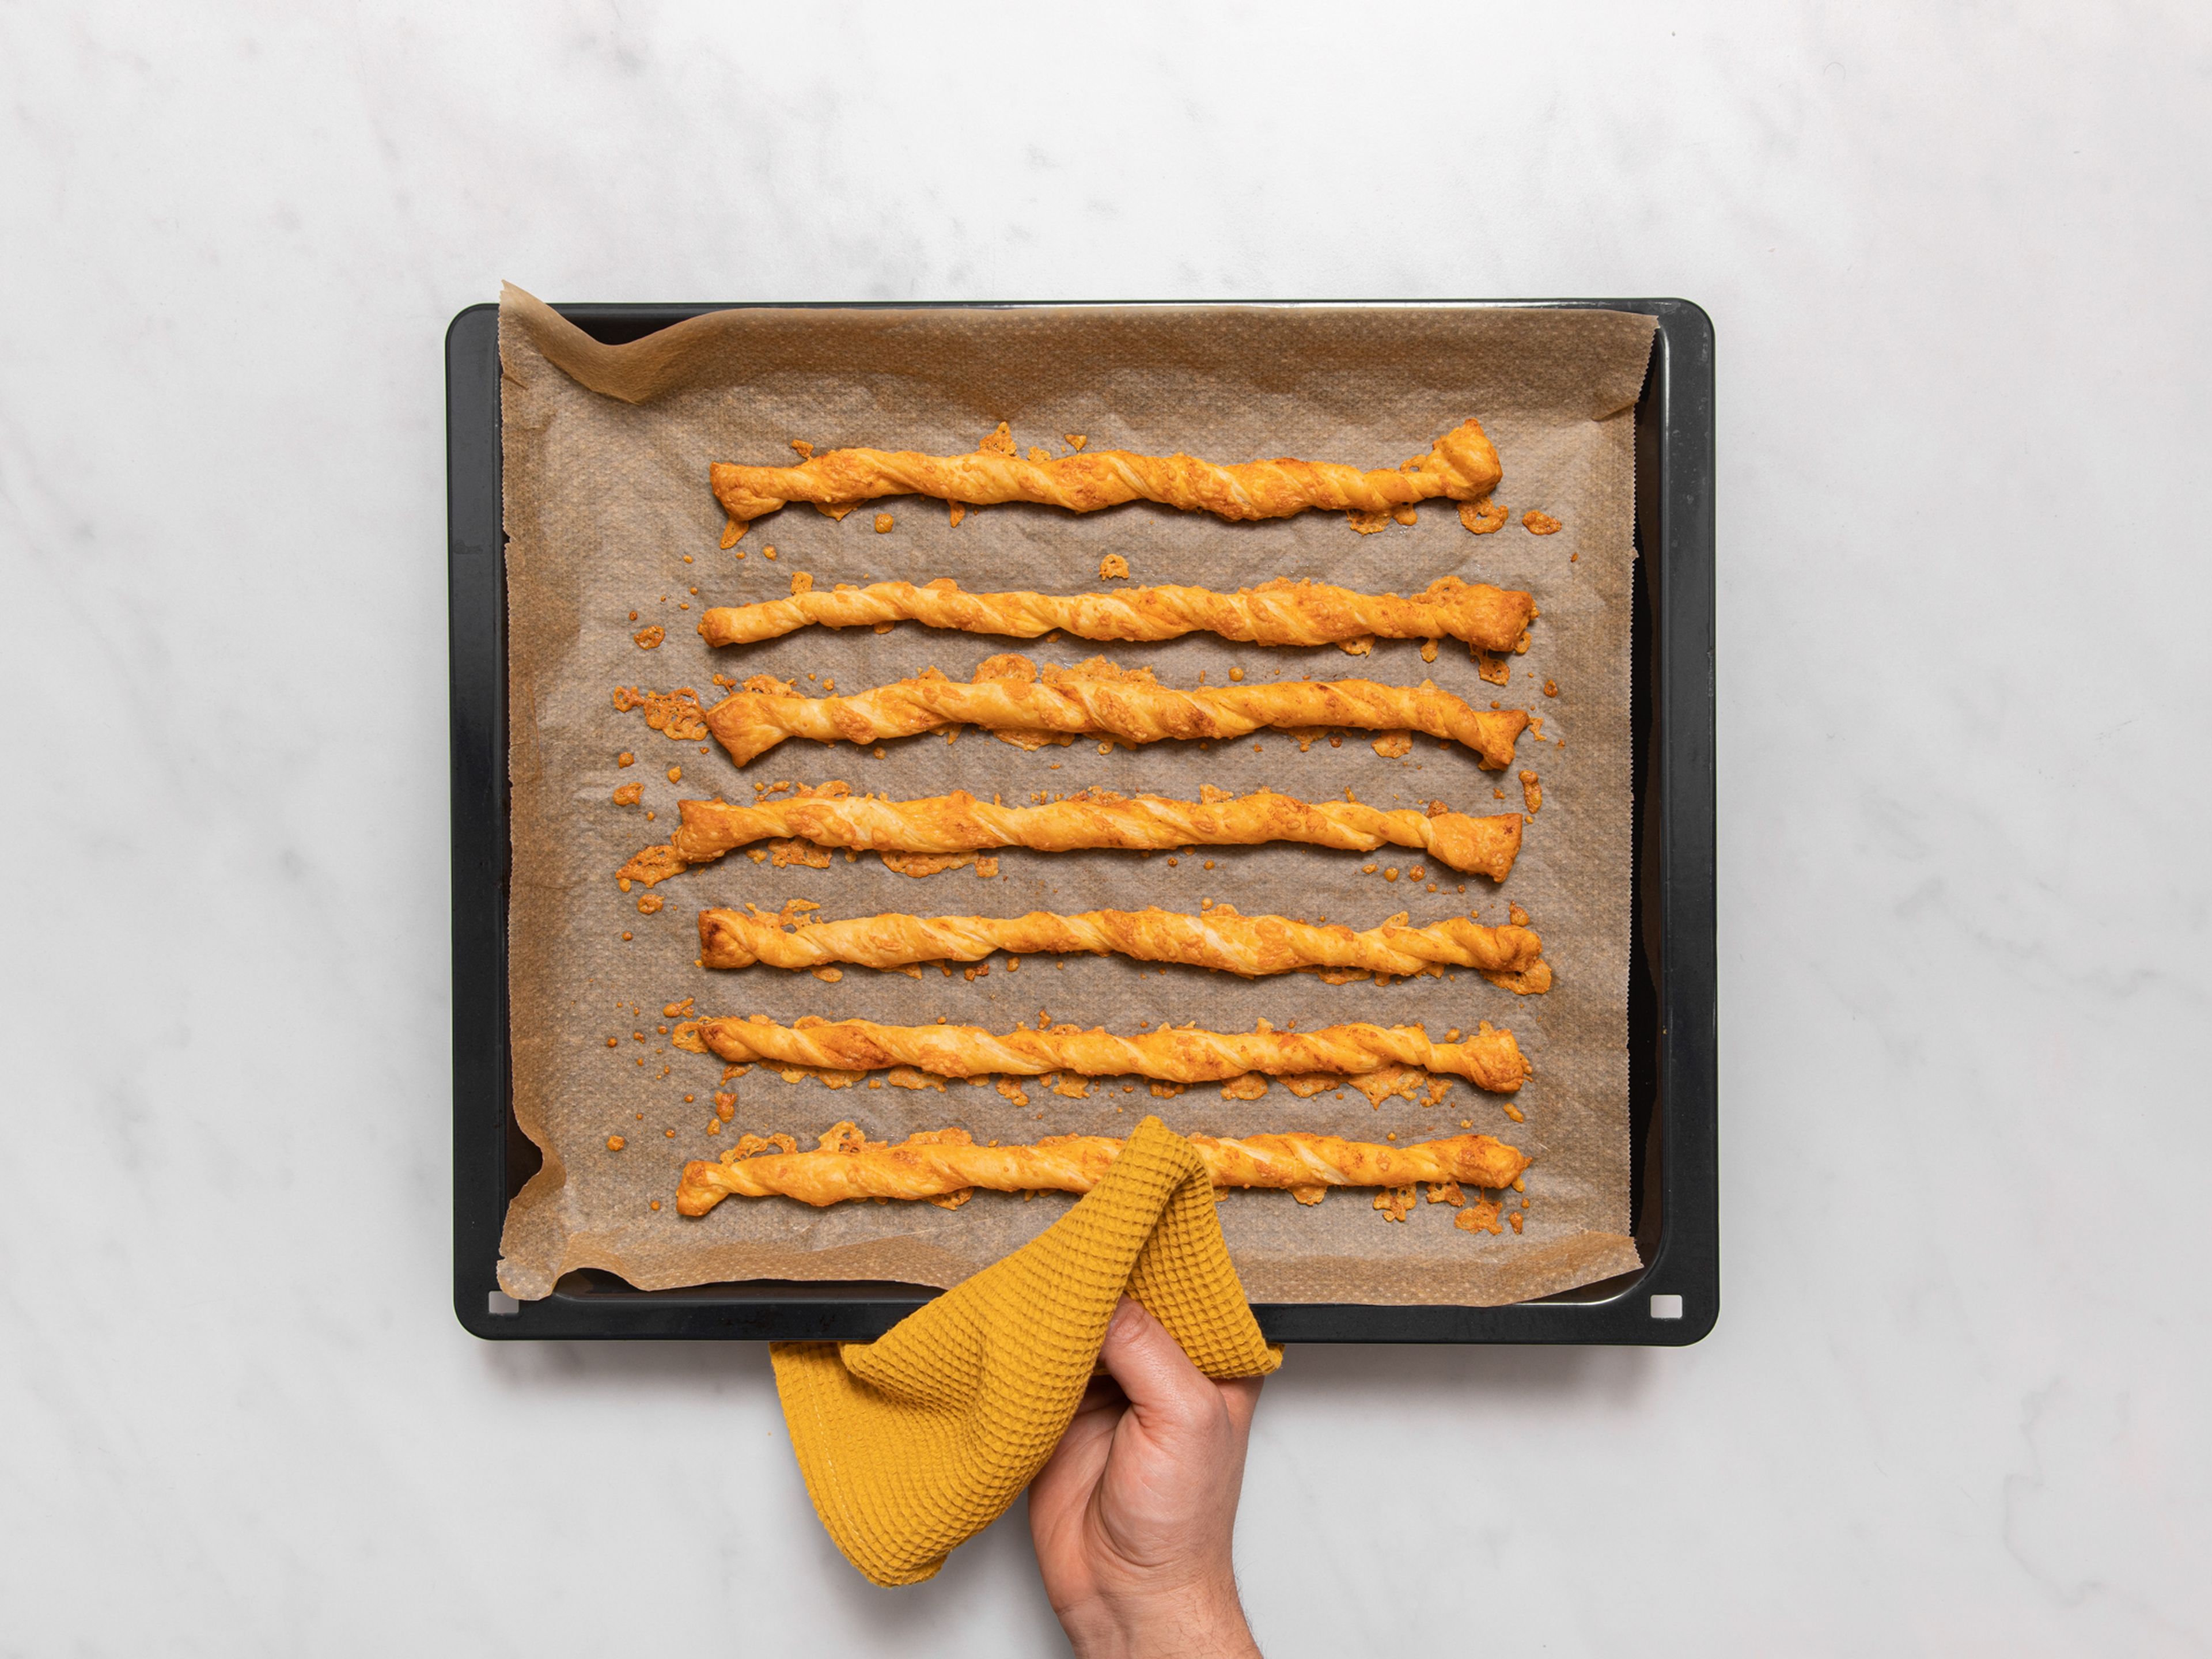 Preheat the oven to 190°C/375°F. Bake cheese straws for approx. 20 min., or until straws are dry to the touch and golden brown all over. Remove and let cool a bit before serving. Enjoy warm or at room temperature!